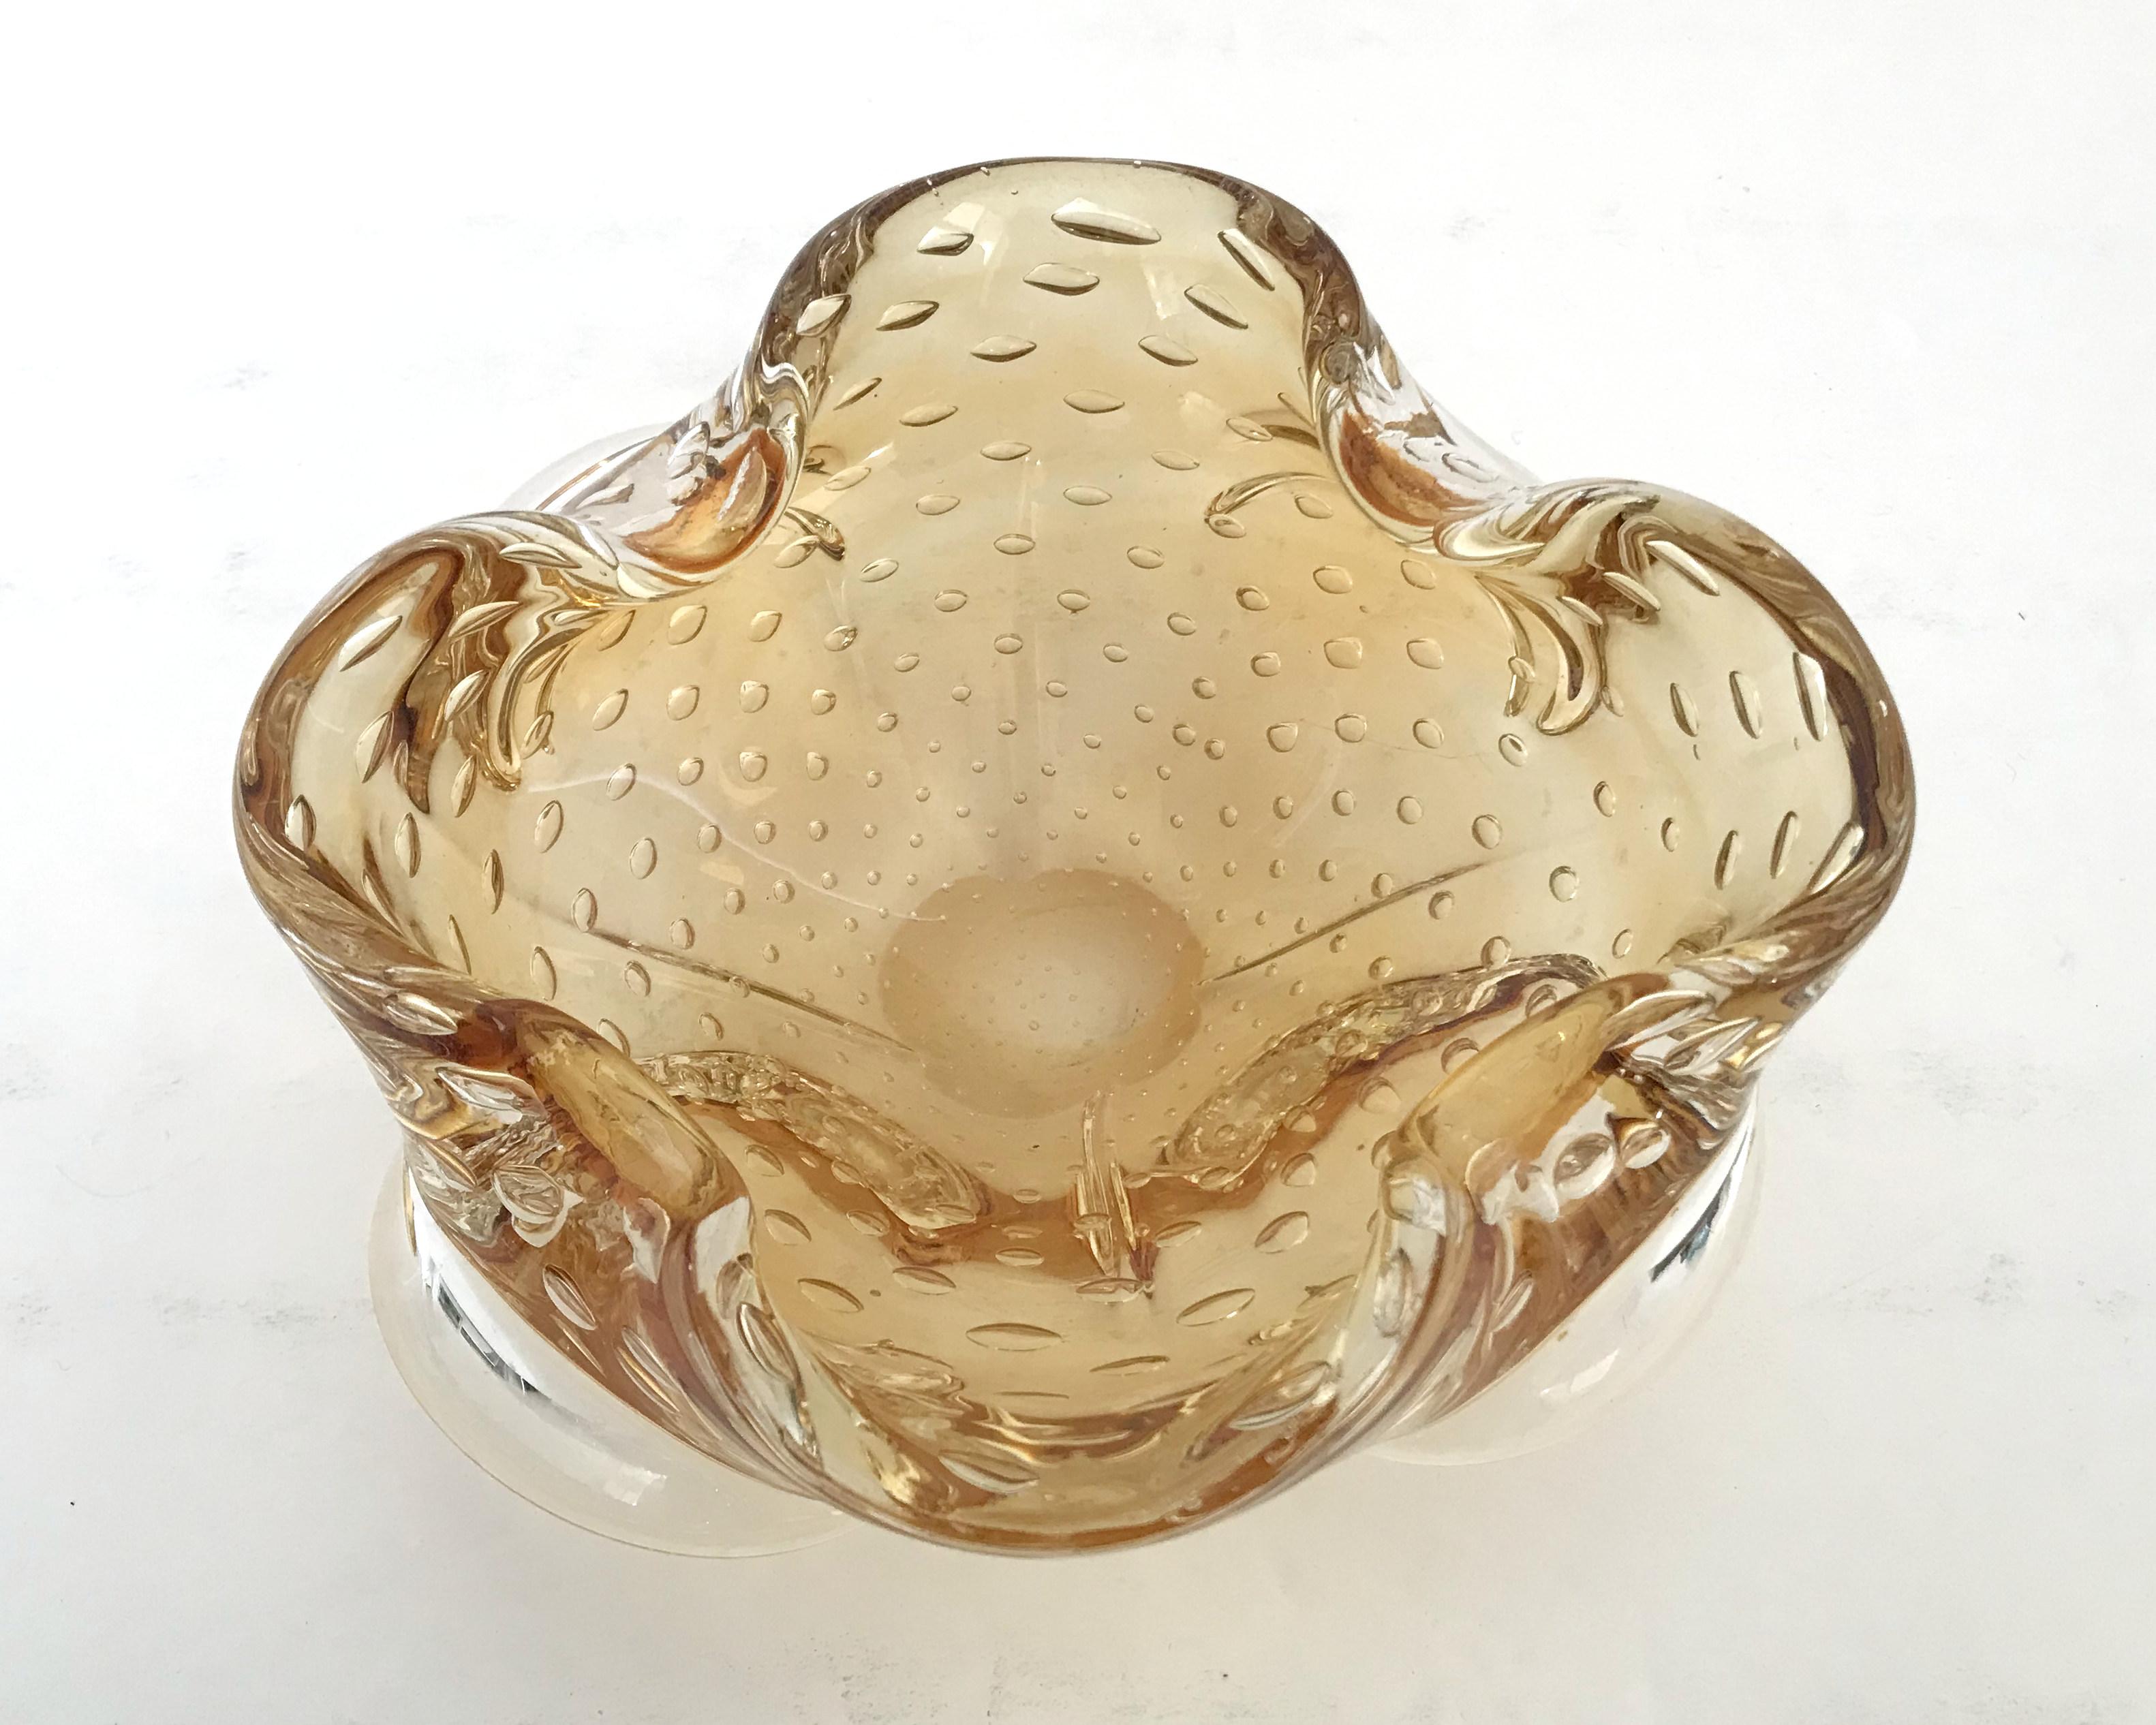 Vintage Italian amber Murano glass ashtray or bowl carefully hand blown with small bubbles inside the glass using pulegoso technique / Made in Italy, circa 1960s
Measures: diameter 7 inches, height 2.75 inches
1 in stock in Palm Springs ON 50% OFF